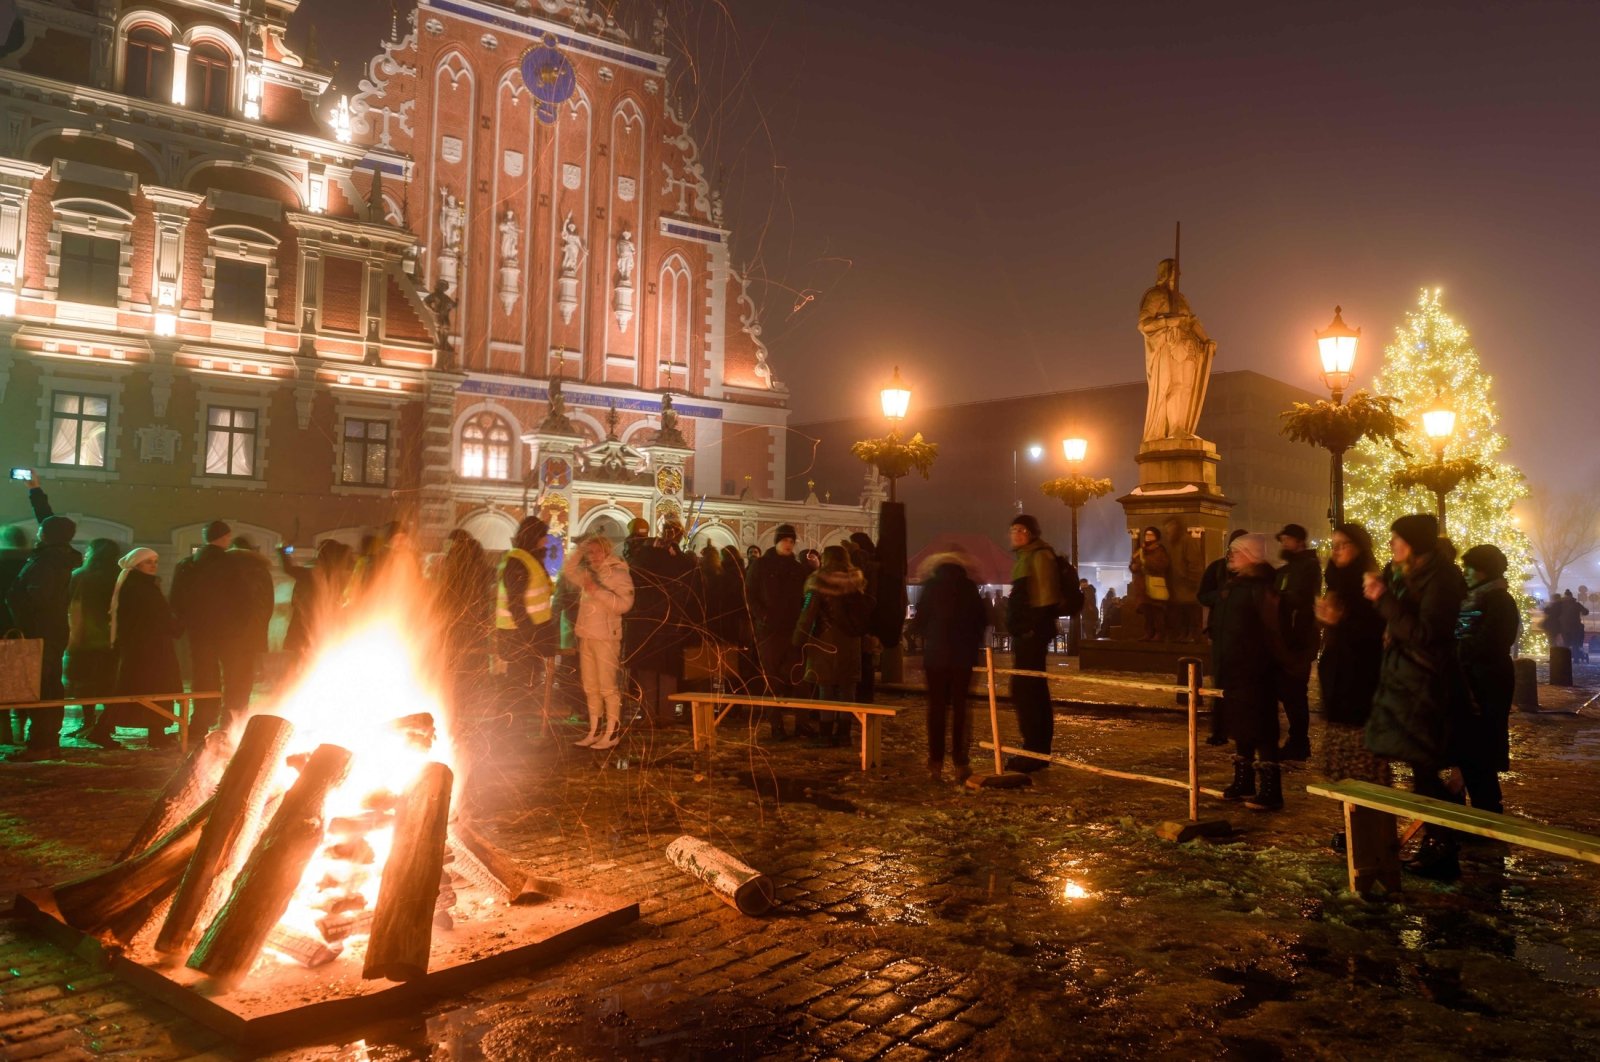 People stand around a fire during the Winter Solstice celebration at the Town Hall Square, in Riga, Latvia, Dec. 21, 2022. (AFP Photo)